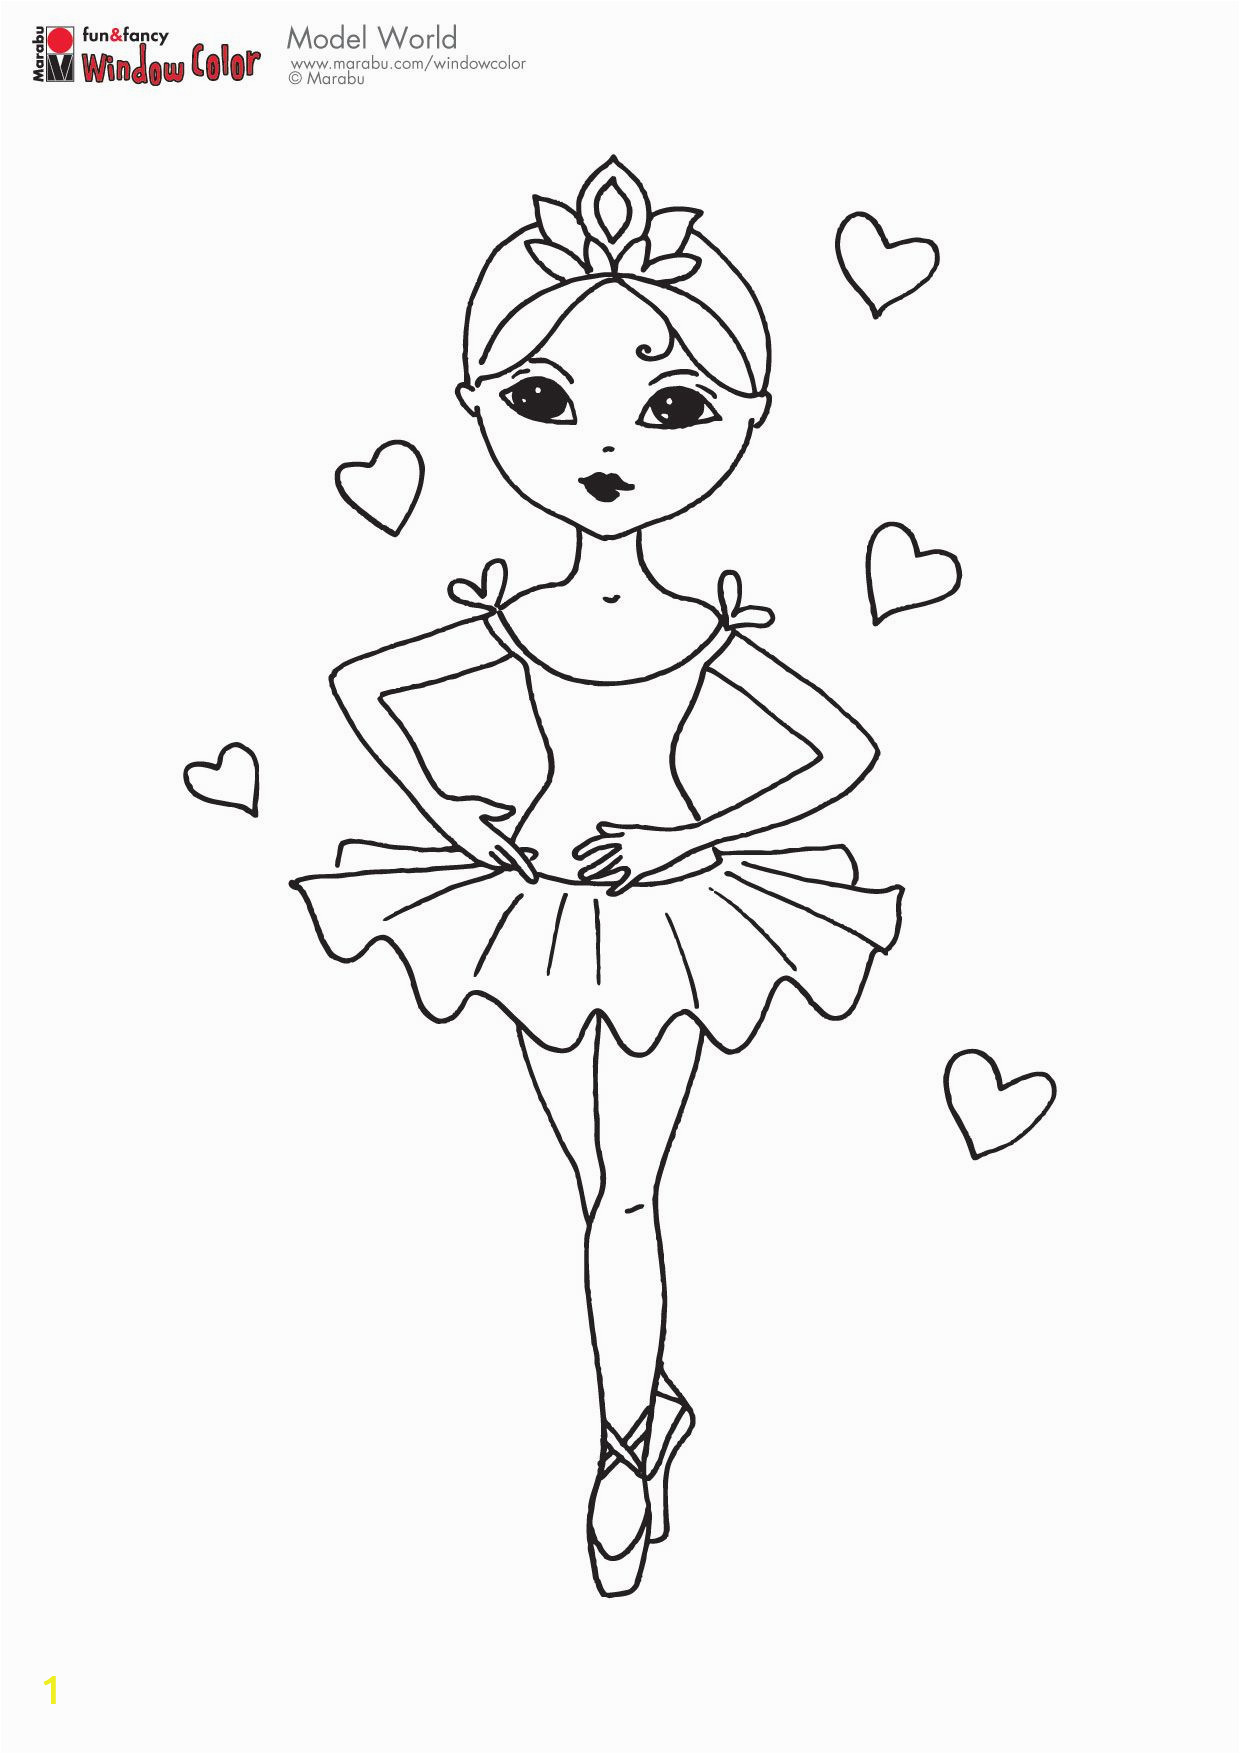 Ballerina Coloring Pages for Girls Ballerina Drawings Ballerina Coloring Pages